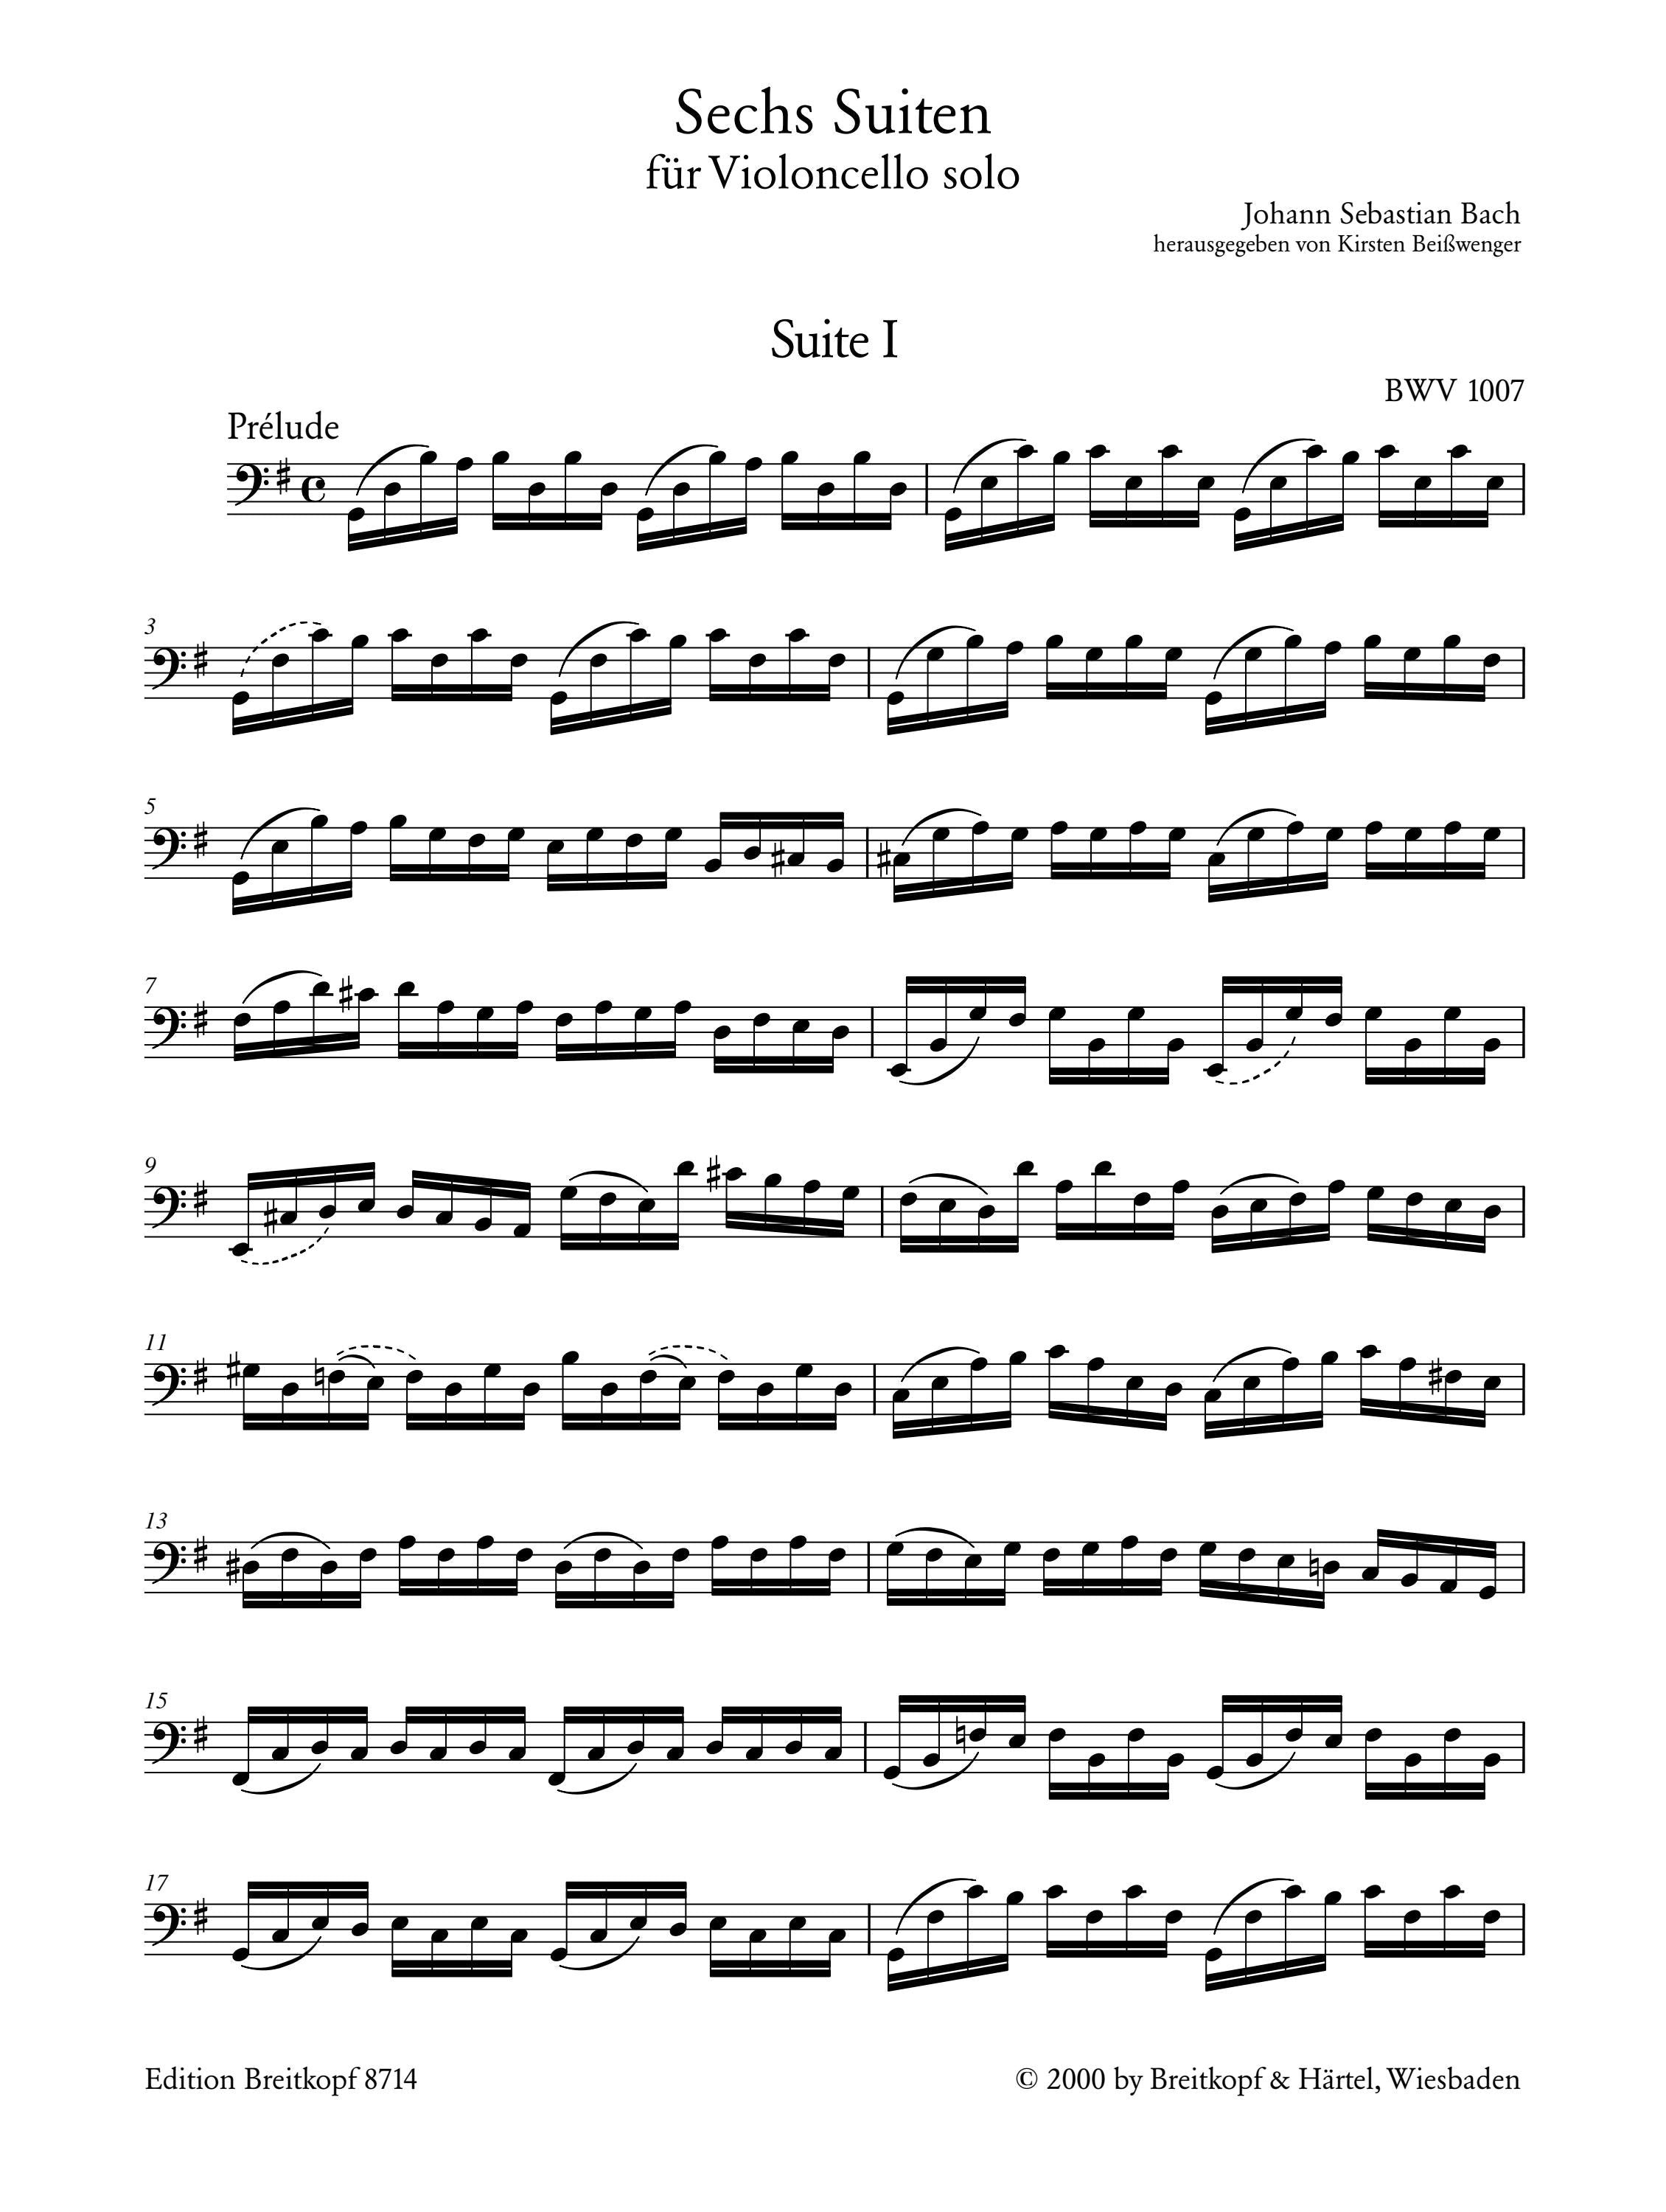 Bach: Six Suites BWV 1007-1012 for Solo Cello (Urtext with Facsimile)